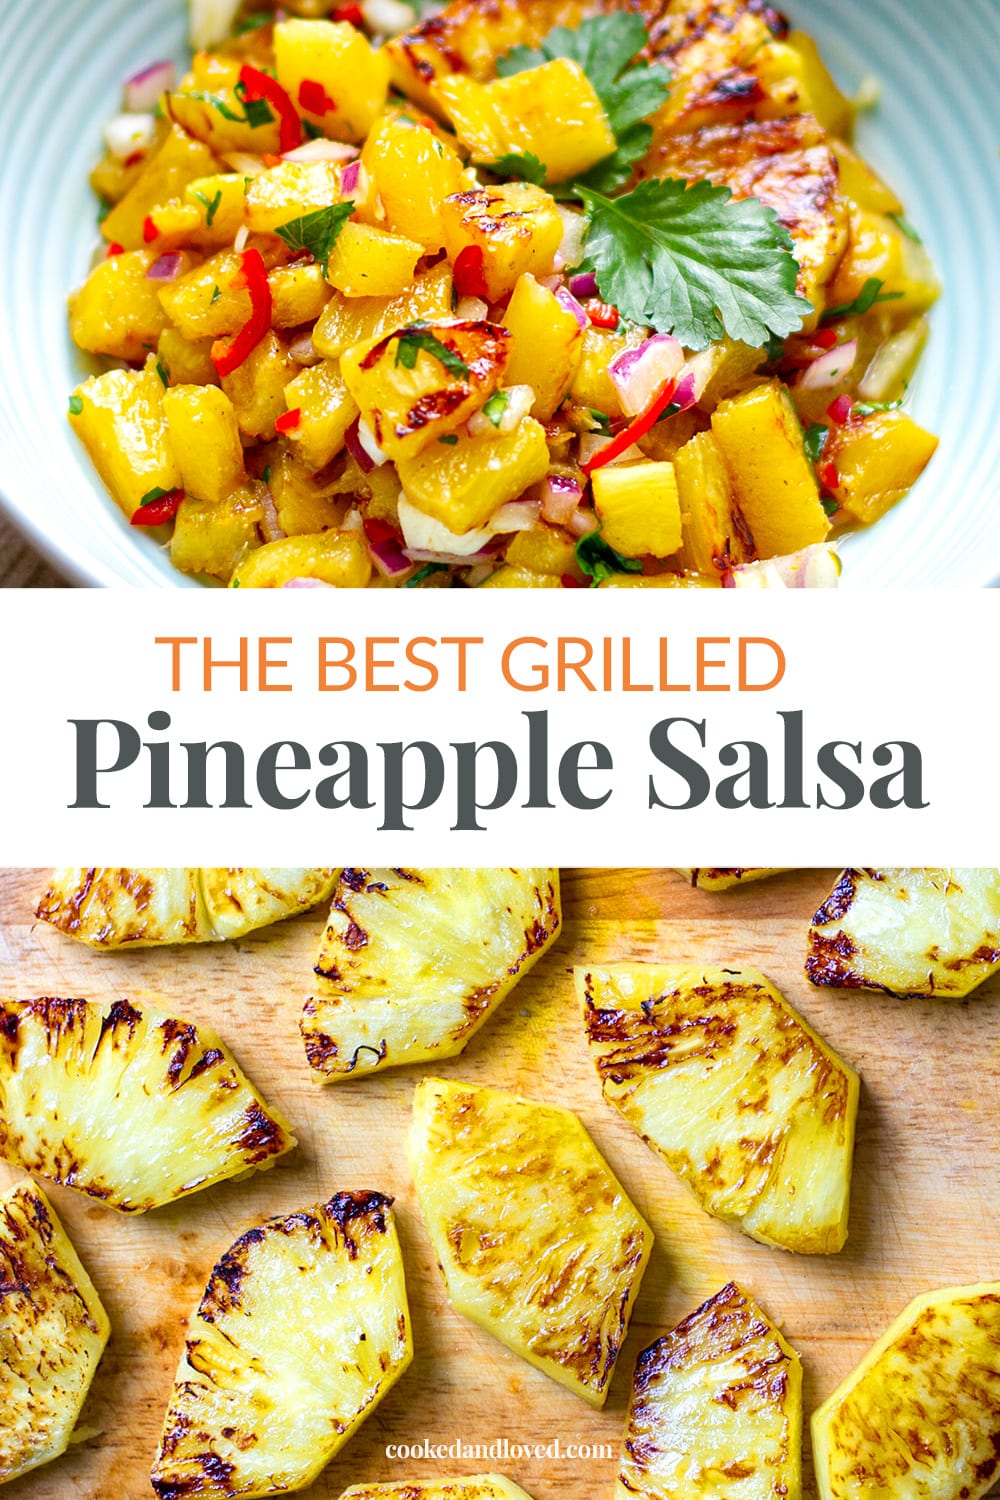 The Best Grilled Pineapple Salsa